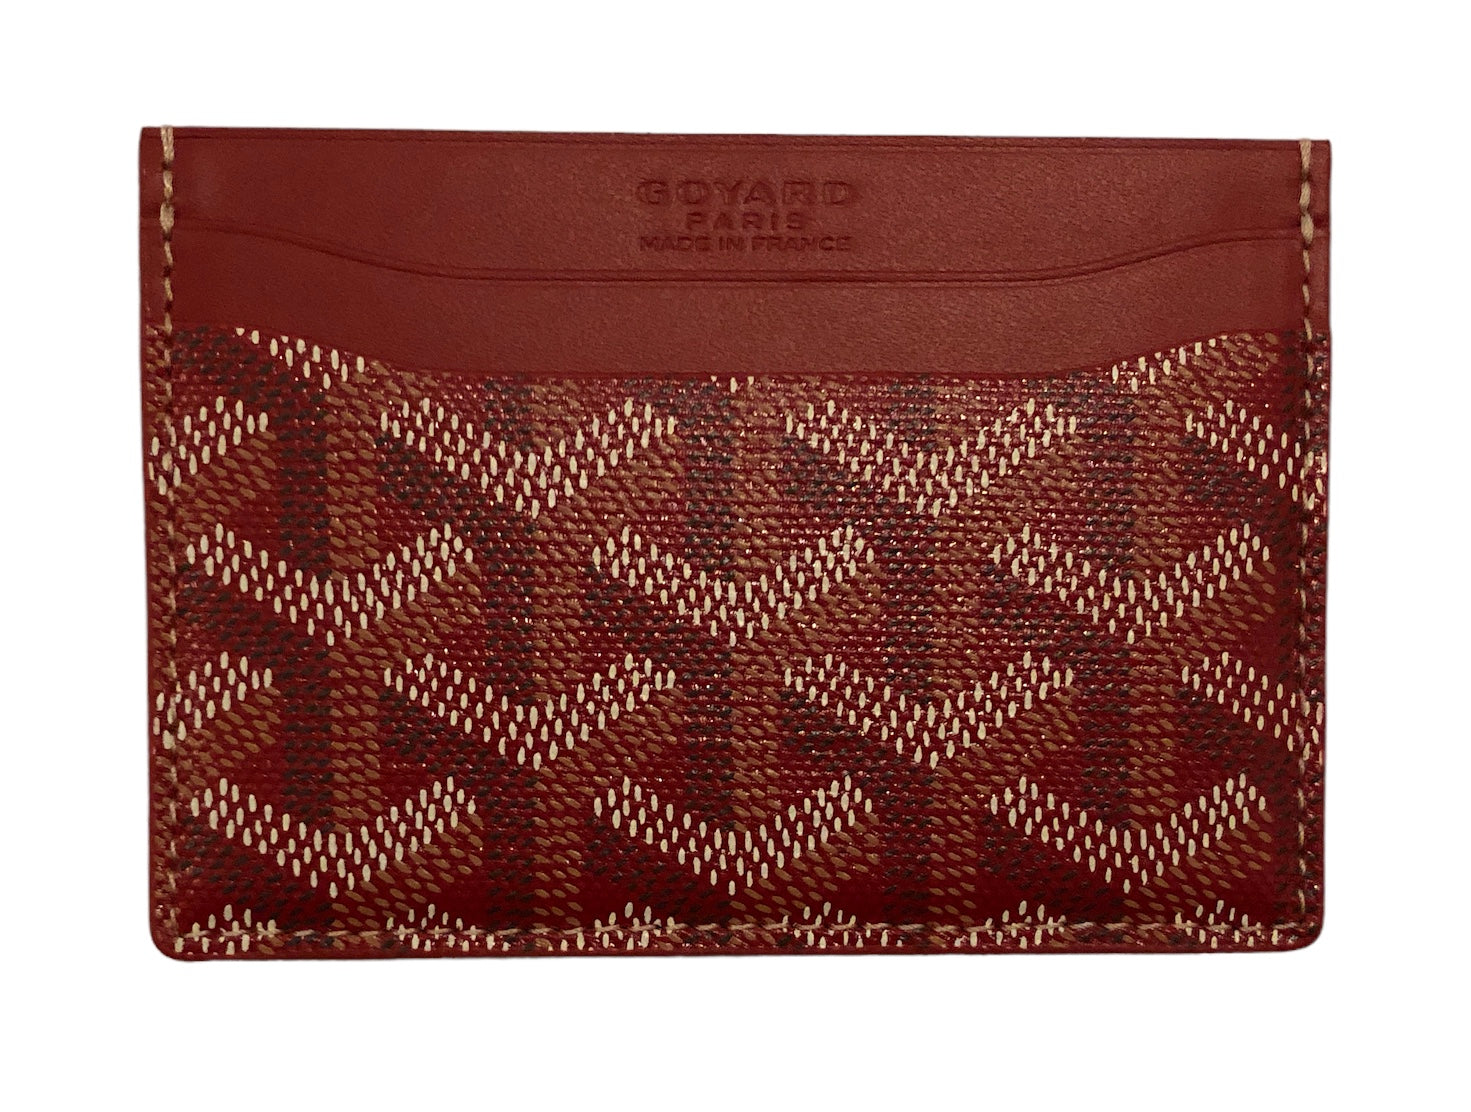 Goyard Saint Sulpice Canvas Card Holder Red NEW 100% Authentic